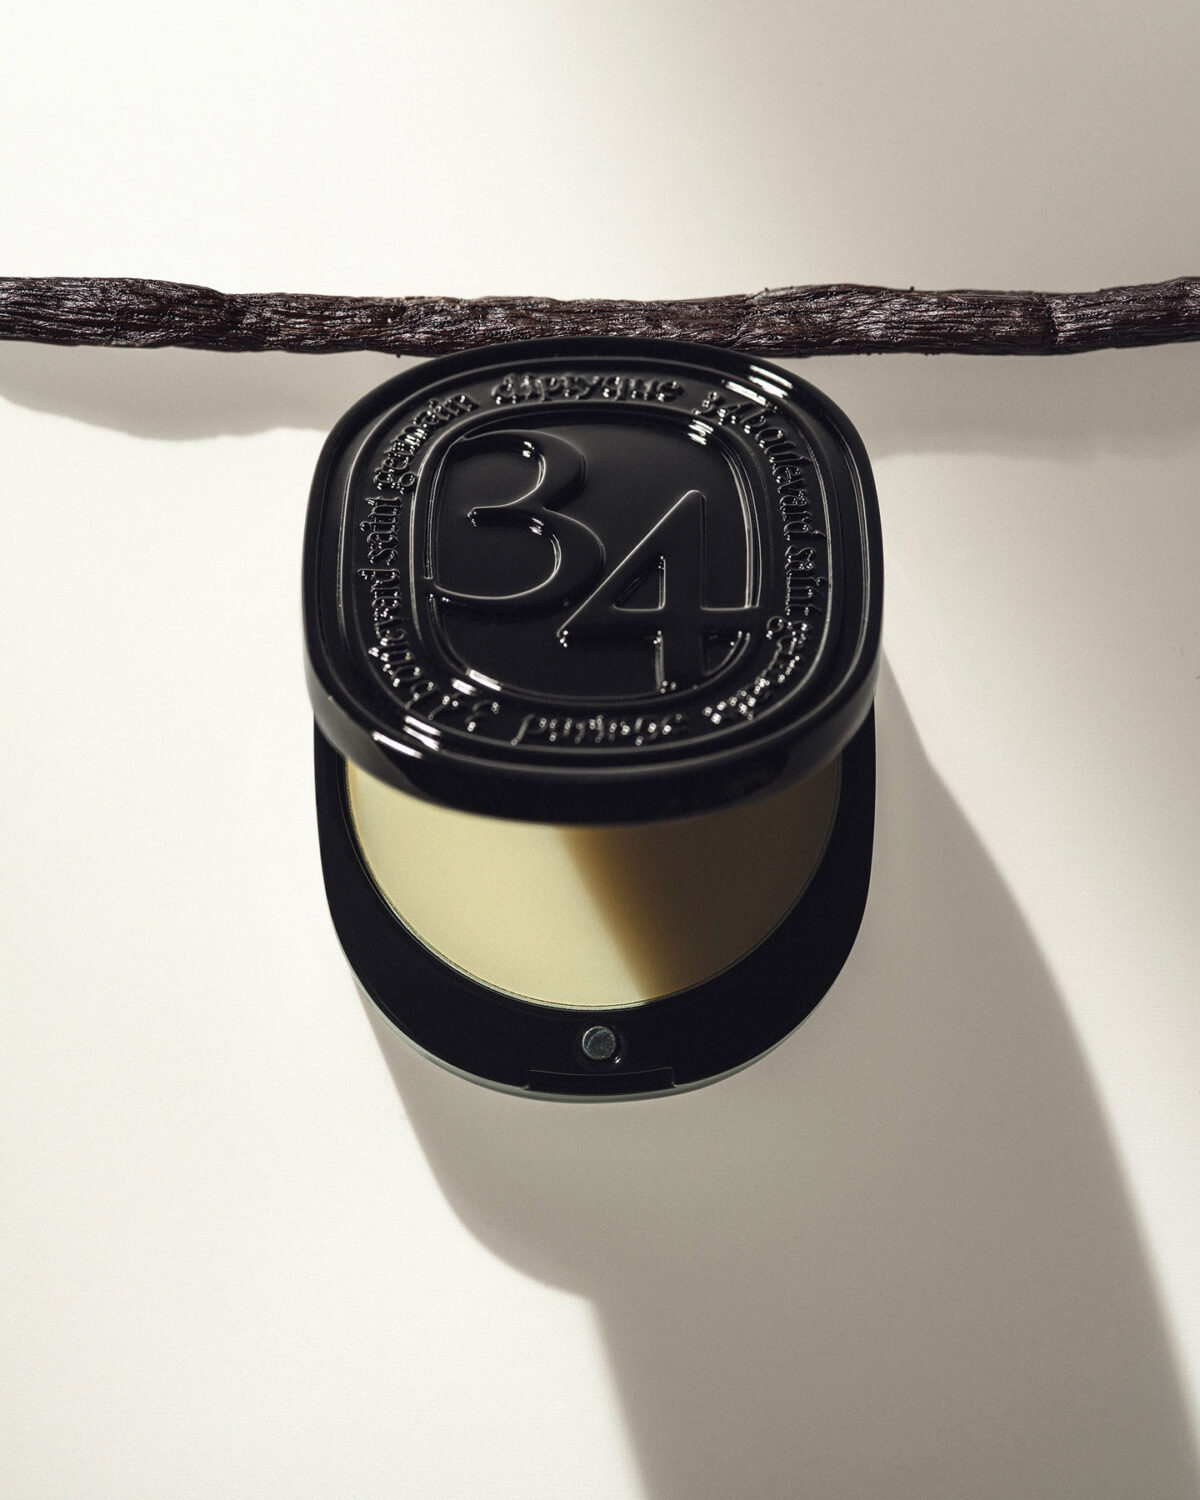 diptyque, klas, Foerster, stilllife, Berlin, beauty, product, photography, fragrance, beauty product, scent